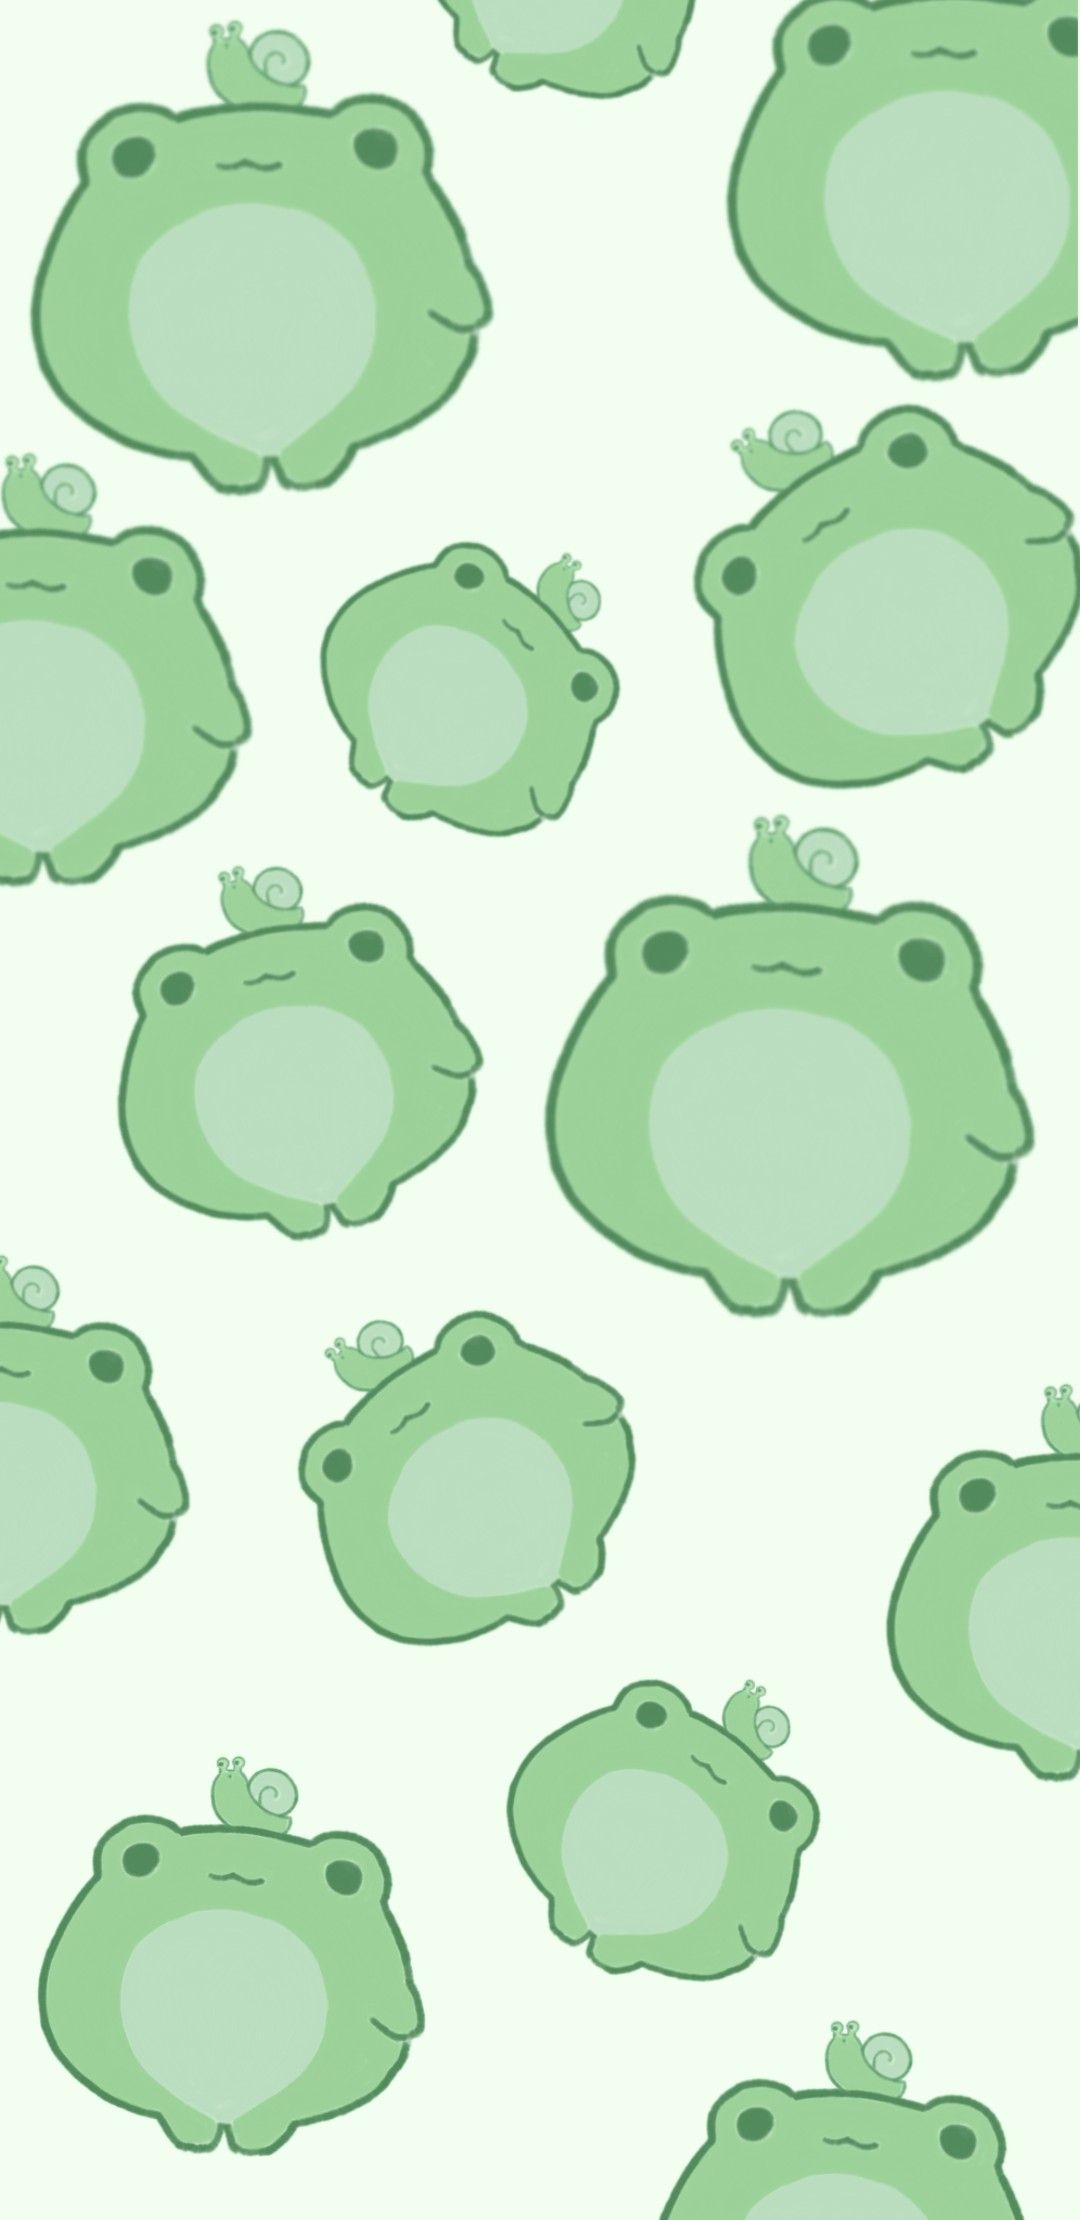 Frog and snail wallpaper